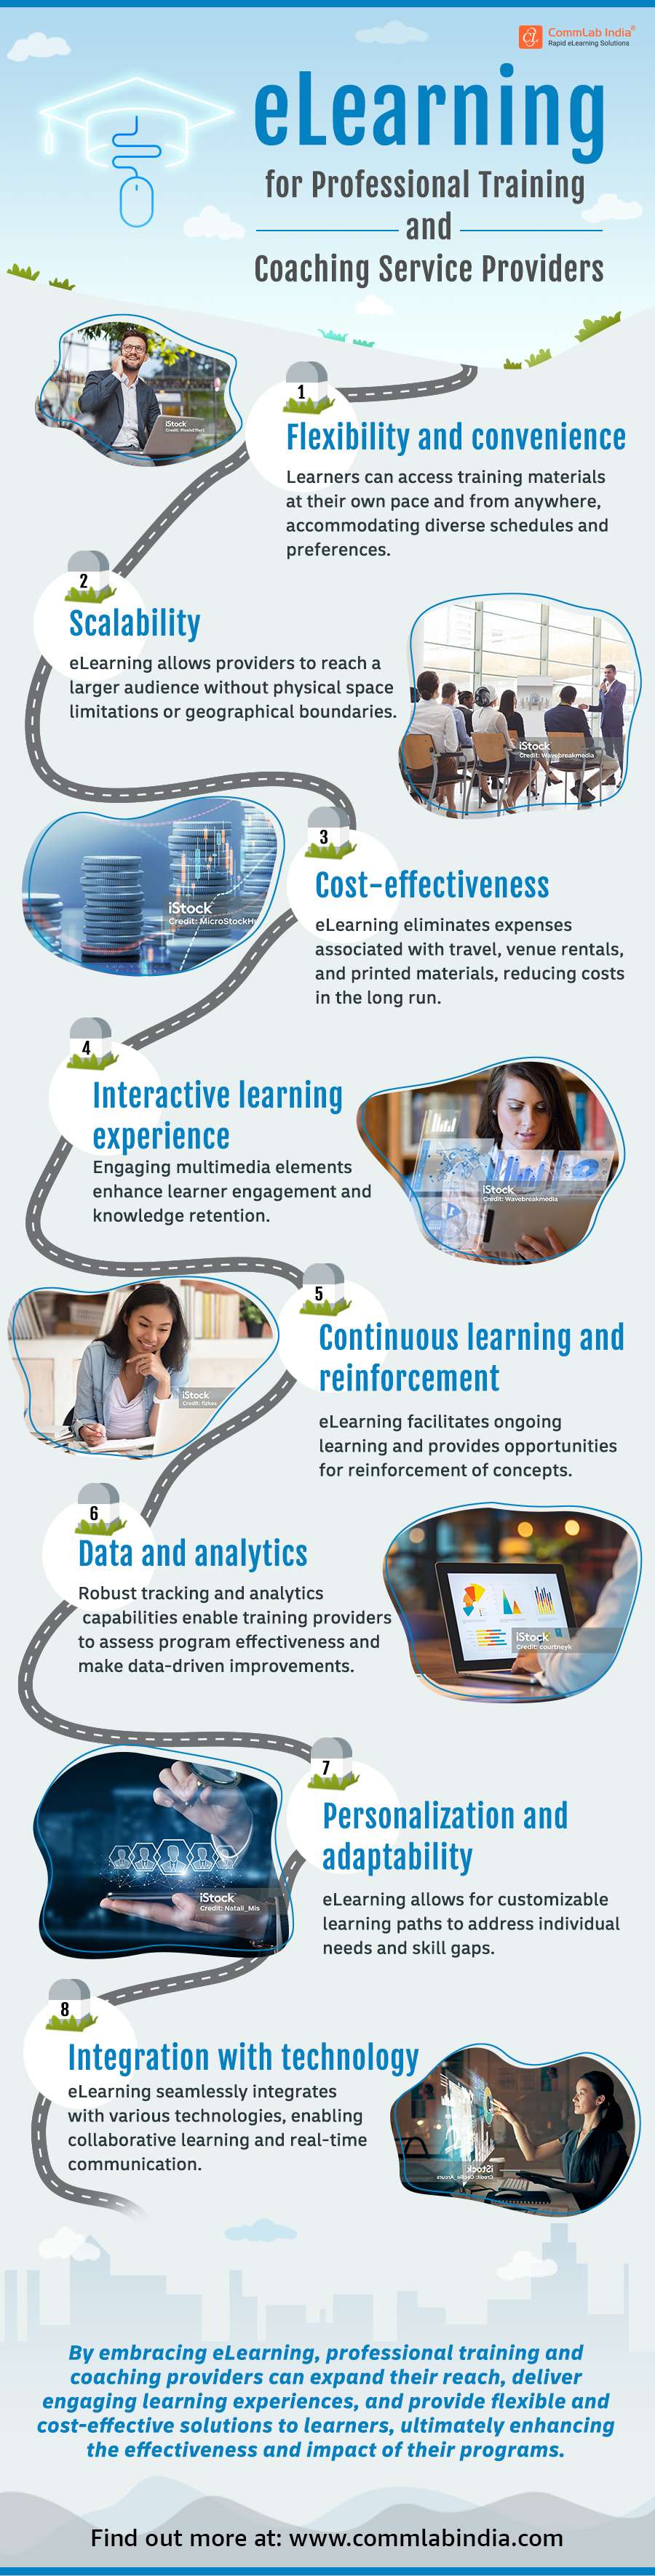 eLearning for Professional Training Providers [Infographic]